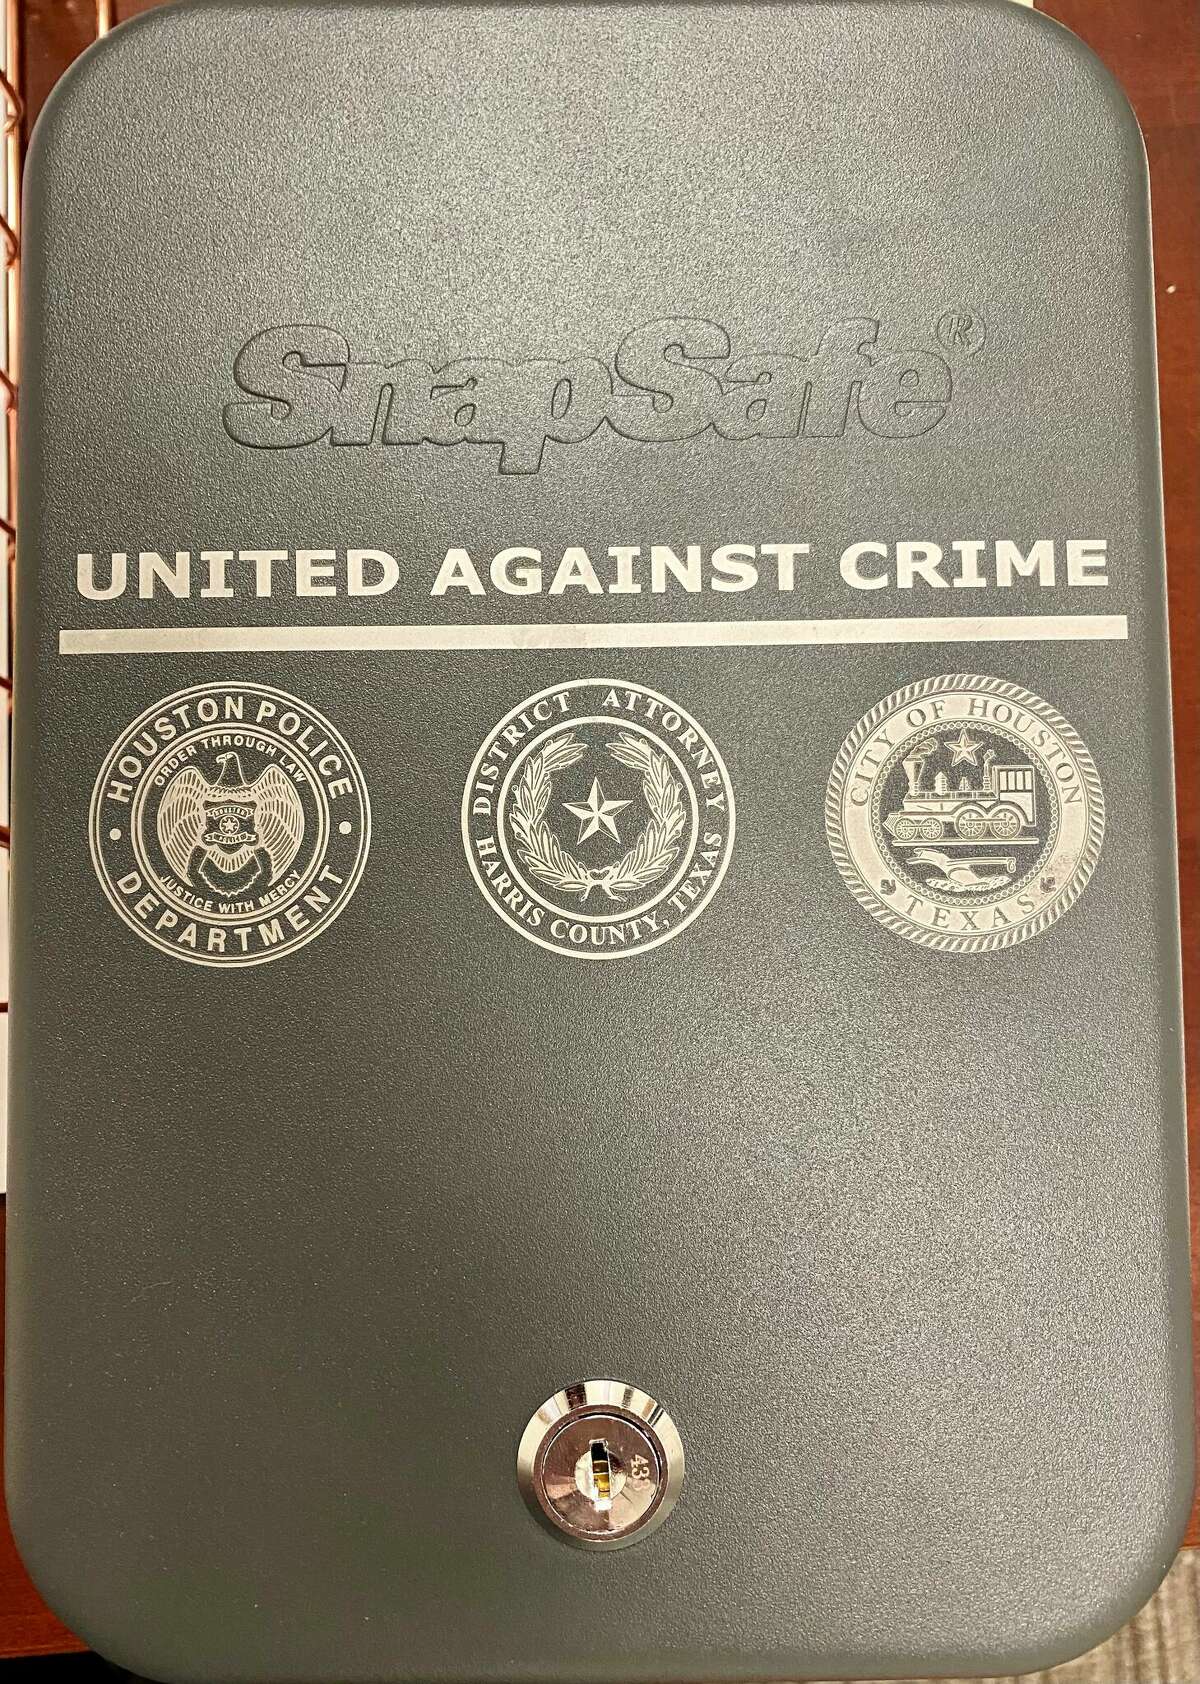 Houston made 1,000 gun safes available on a first-come, first-served basis as a part of the city's recently announced safety campaign.